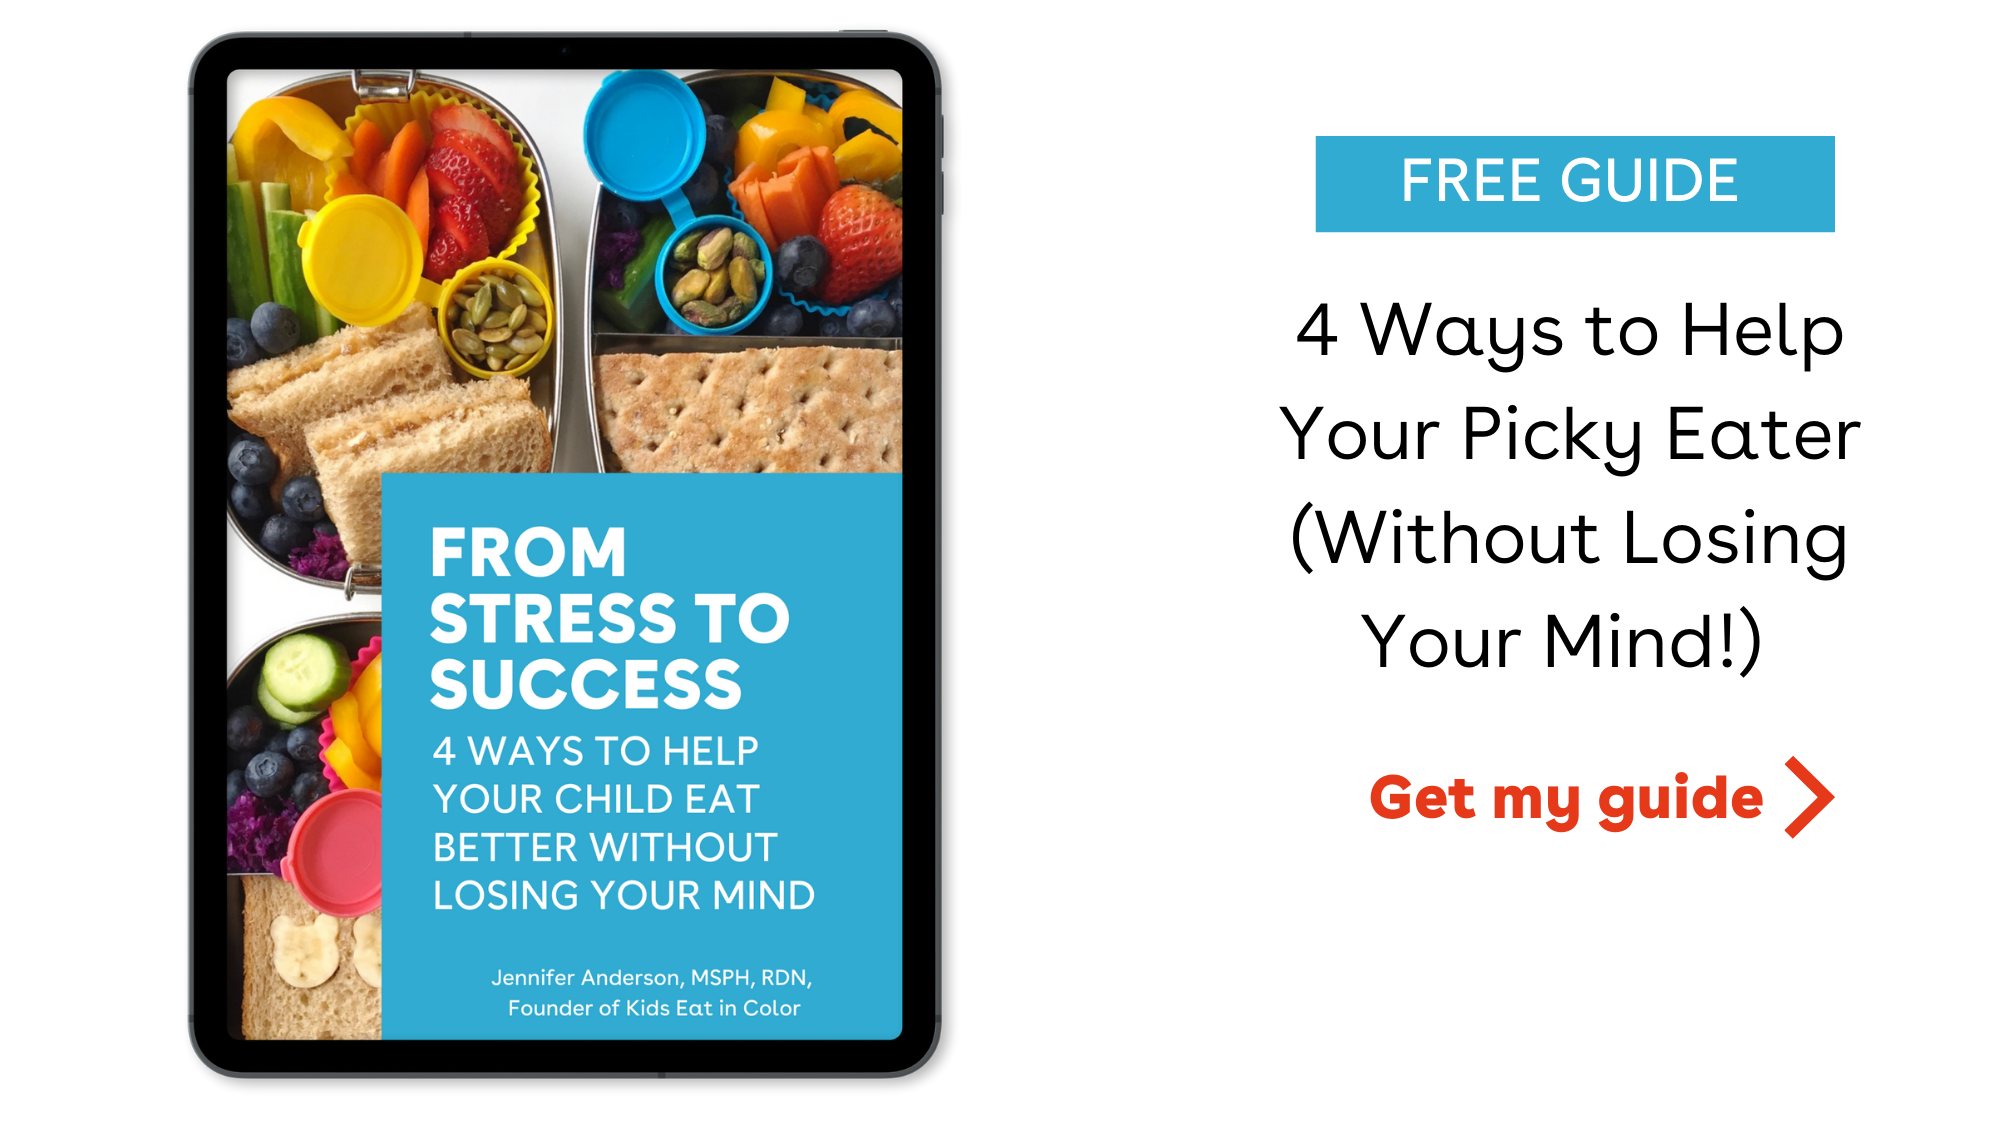 https://kidseatincolor.com/wp-content/uploads/2022/06/4-Ways-to-Help-Your-Picky-Eater-Without-Losing-Your-Mind-1.png